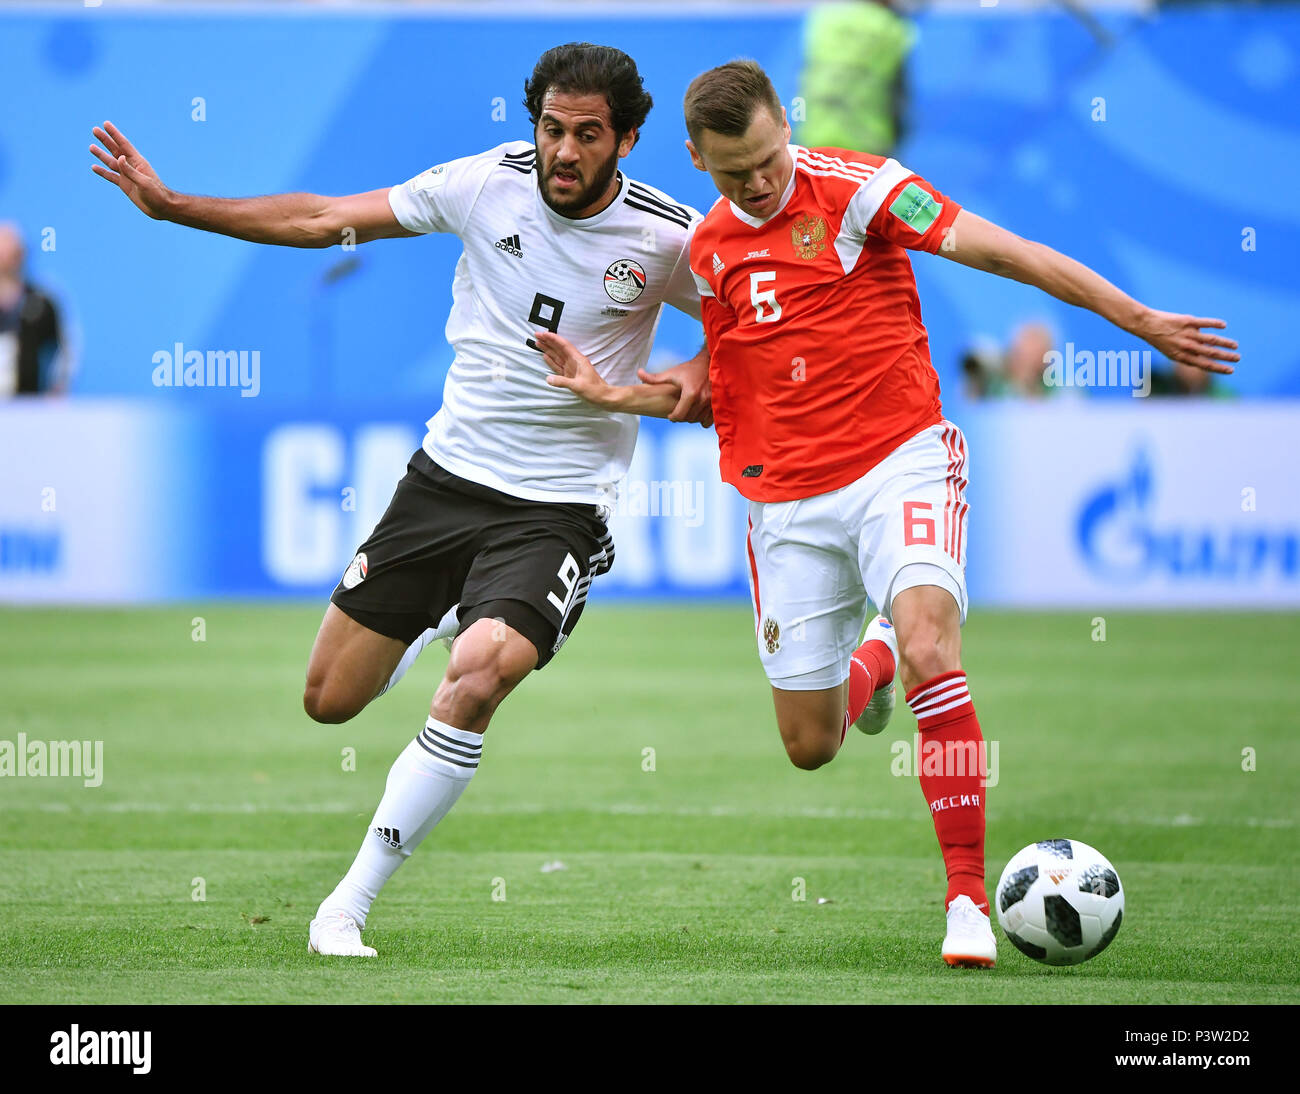 Saint Petersburg, Russia. 19th June, 2018. Denis Cheryshev (R) of Russia vies with Marwan Mohsen of Egypt during a Group A match between Russia and Egypt at the 2018 FIFA World Cup in Saint Petersburg, Russia, June 19, 2018. Credit: Li Ga/Xinhua/Alamy Live News Stock Photo